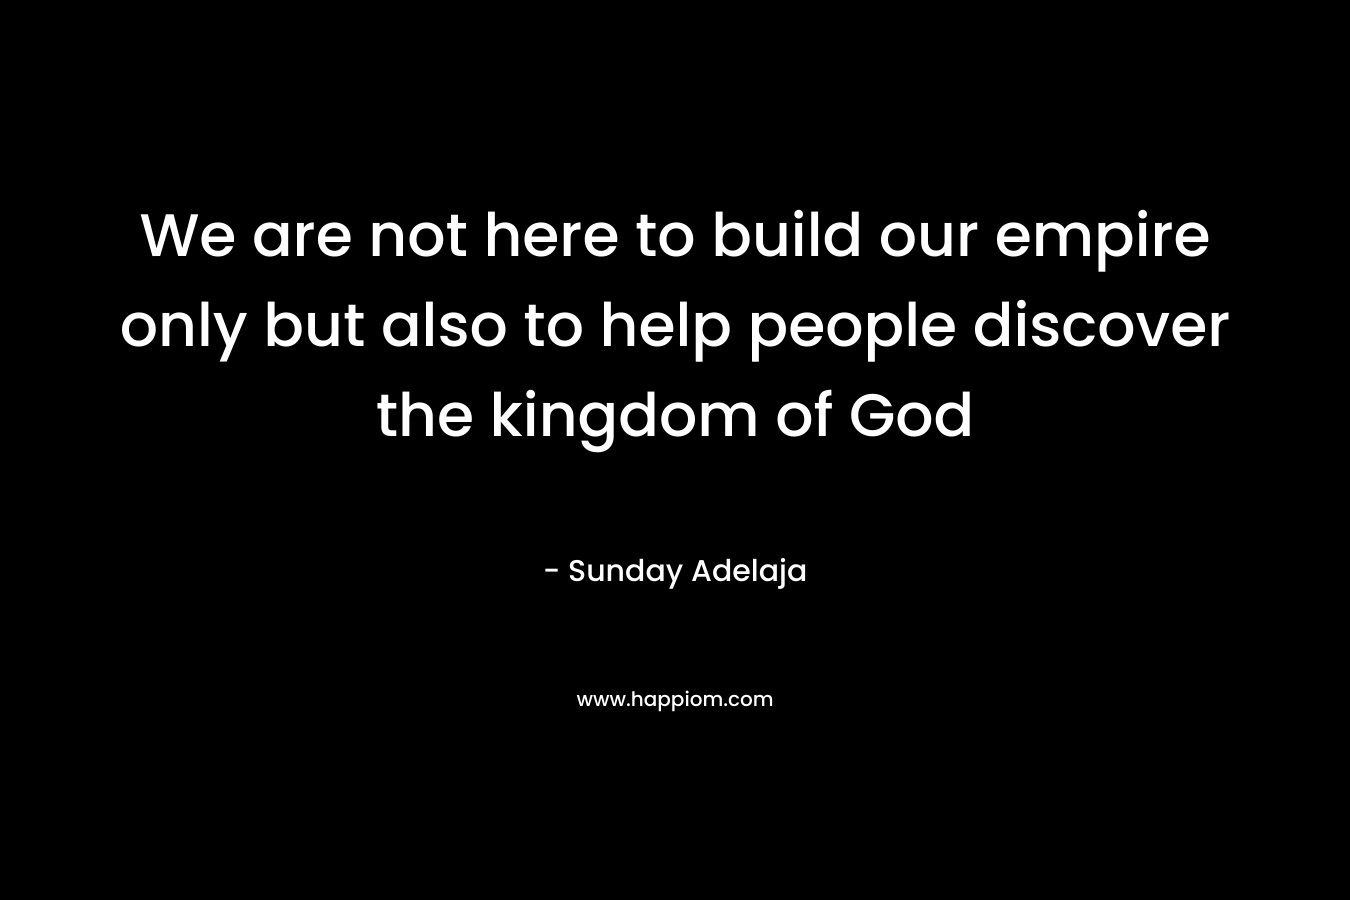 We are not here to build our empire only but also to help people discover the kingdom of God